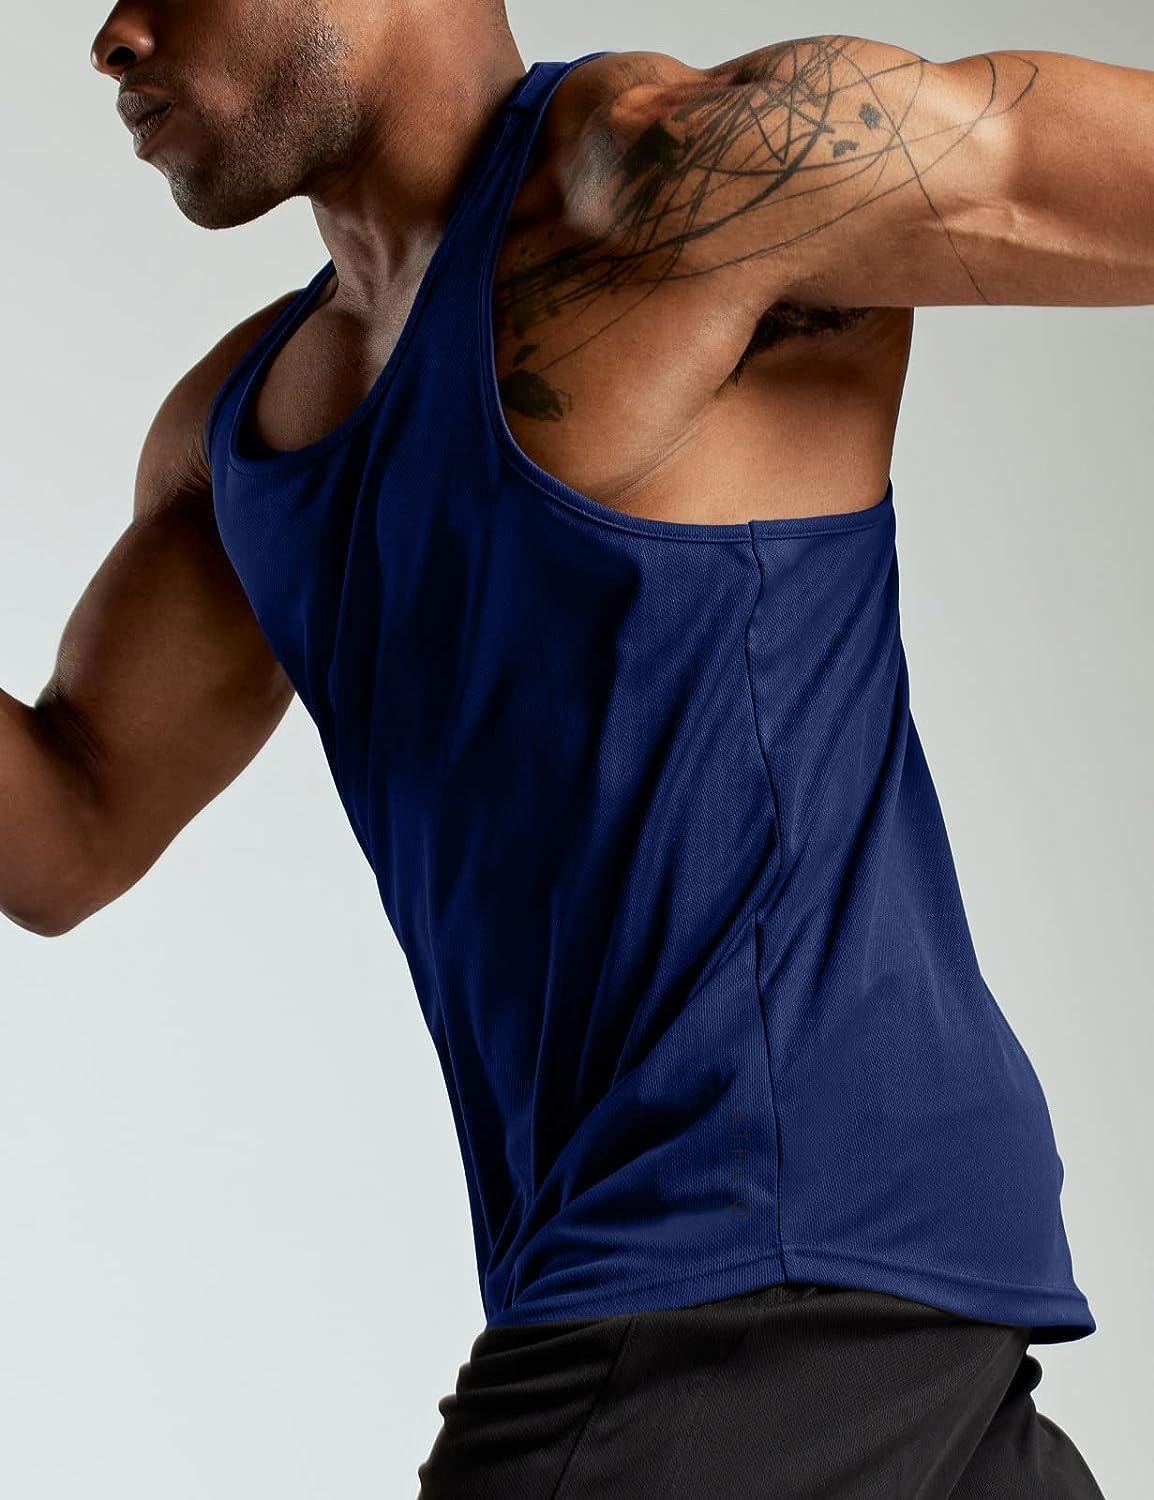 Pilates Buff • Pilates Tank tops, Shirts and Accessories